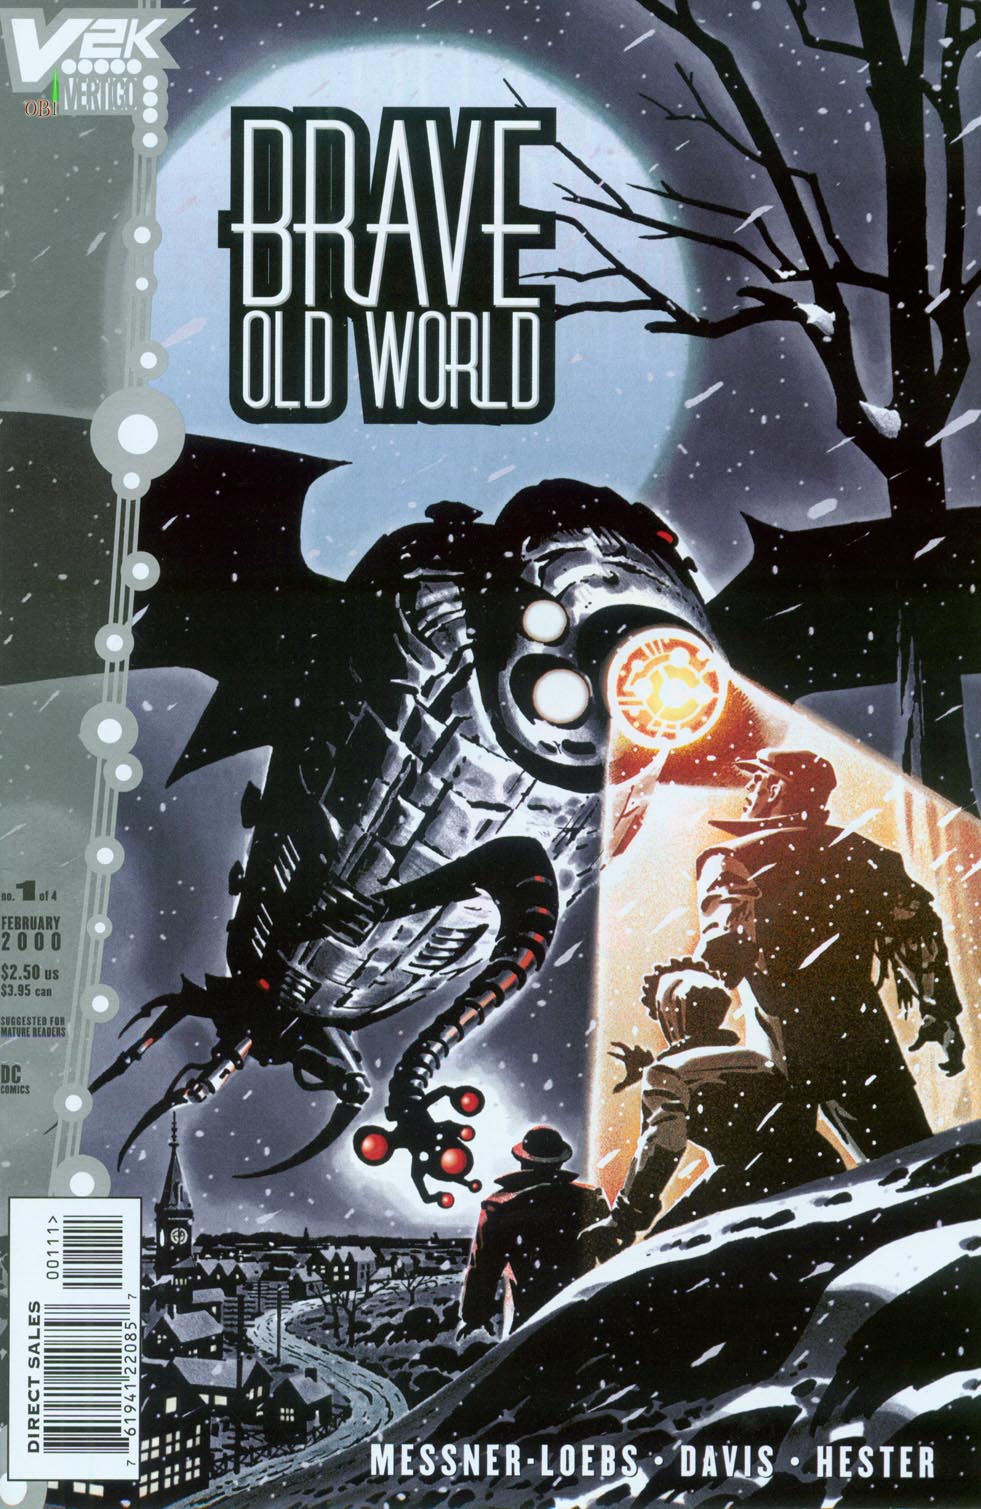 Read online Brave Old World comic -  Issue #1 - 1